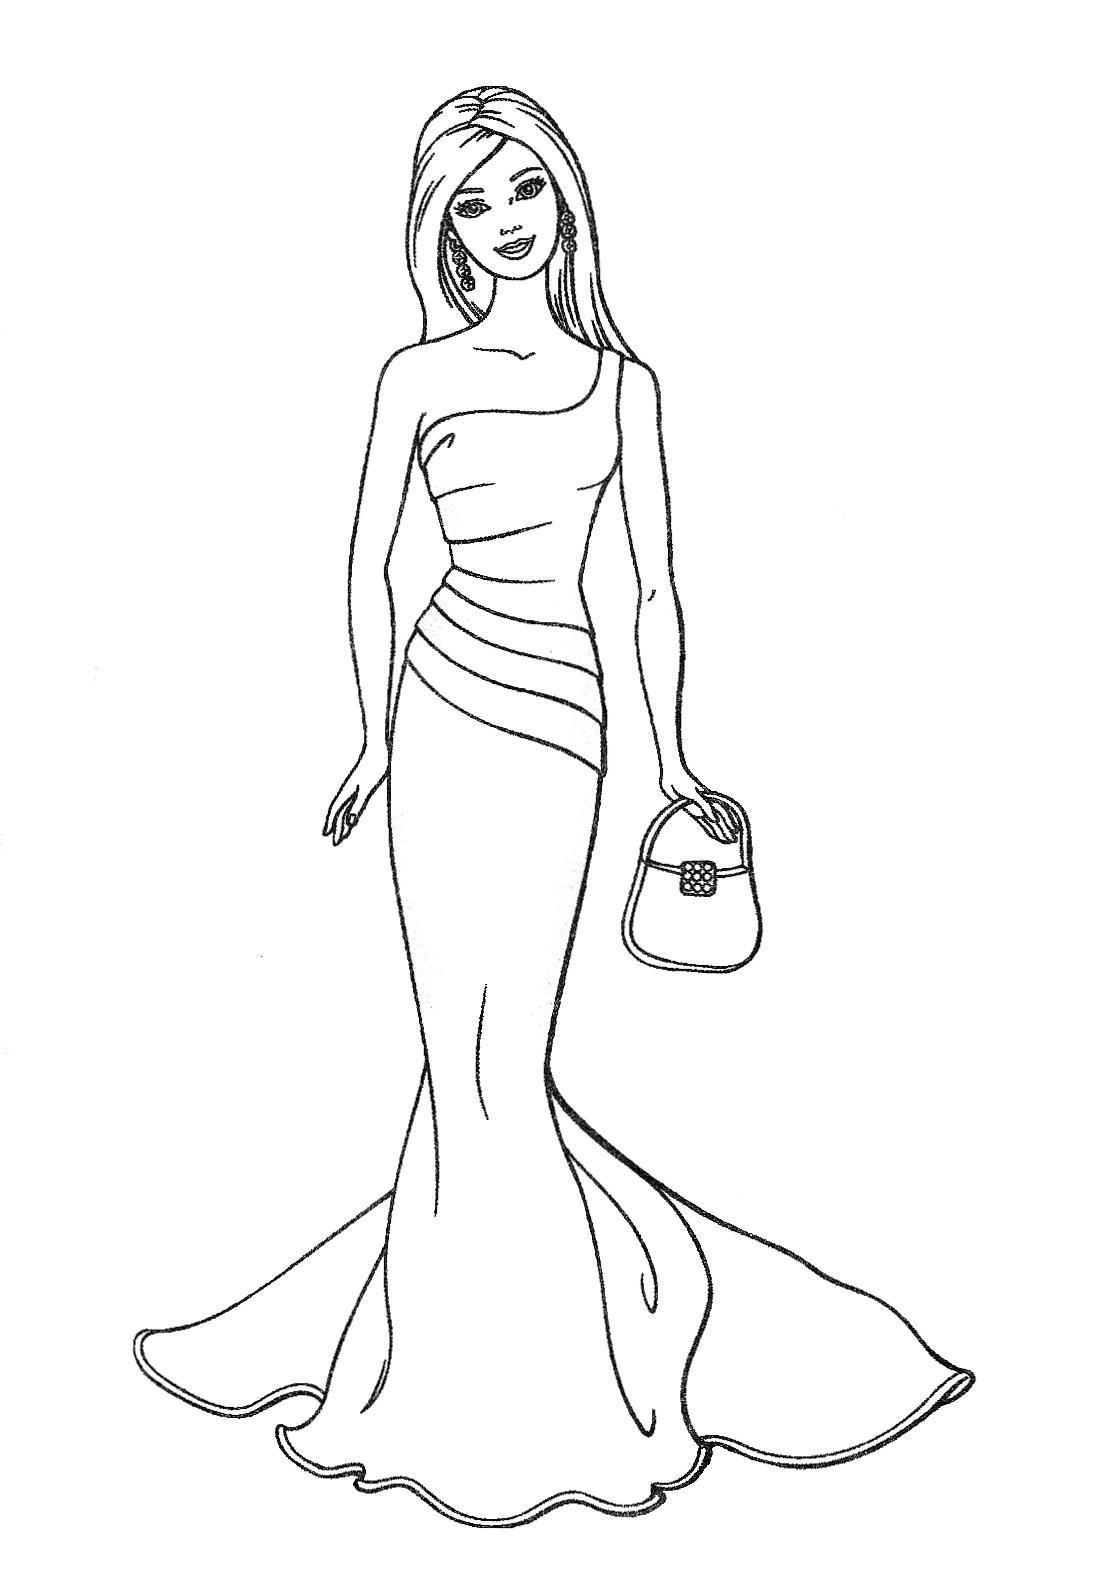 Barbie Pretty Dress Coloring Pages Free Printable Coloring Pages For Kids ~ Colouring ...1103 x 1589